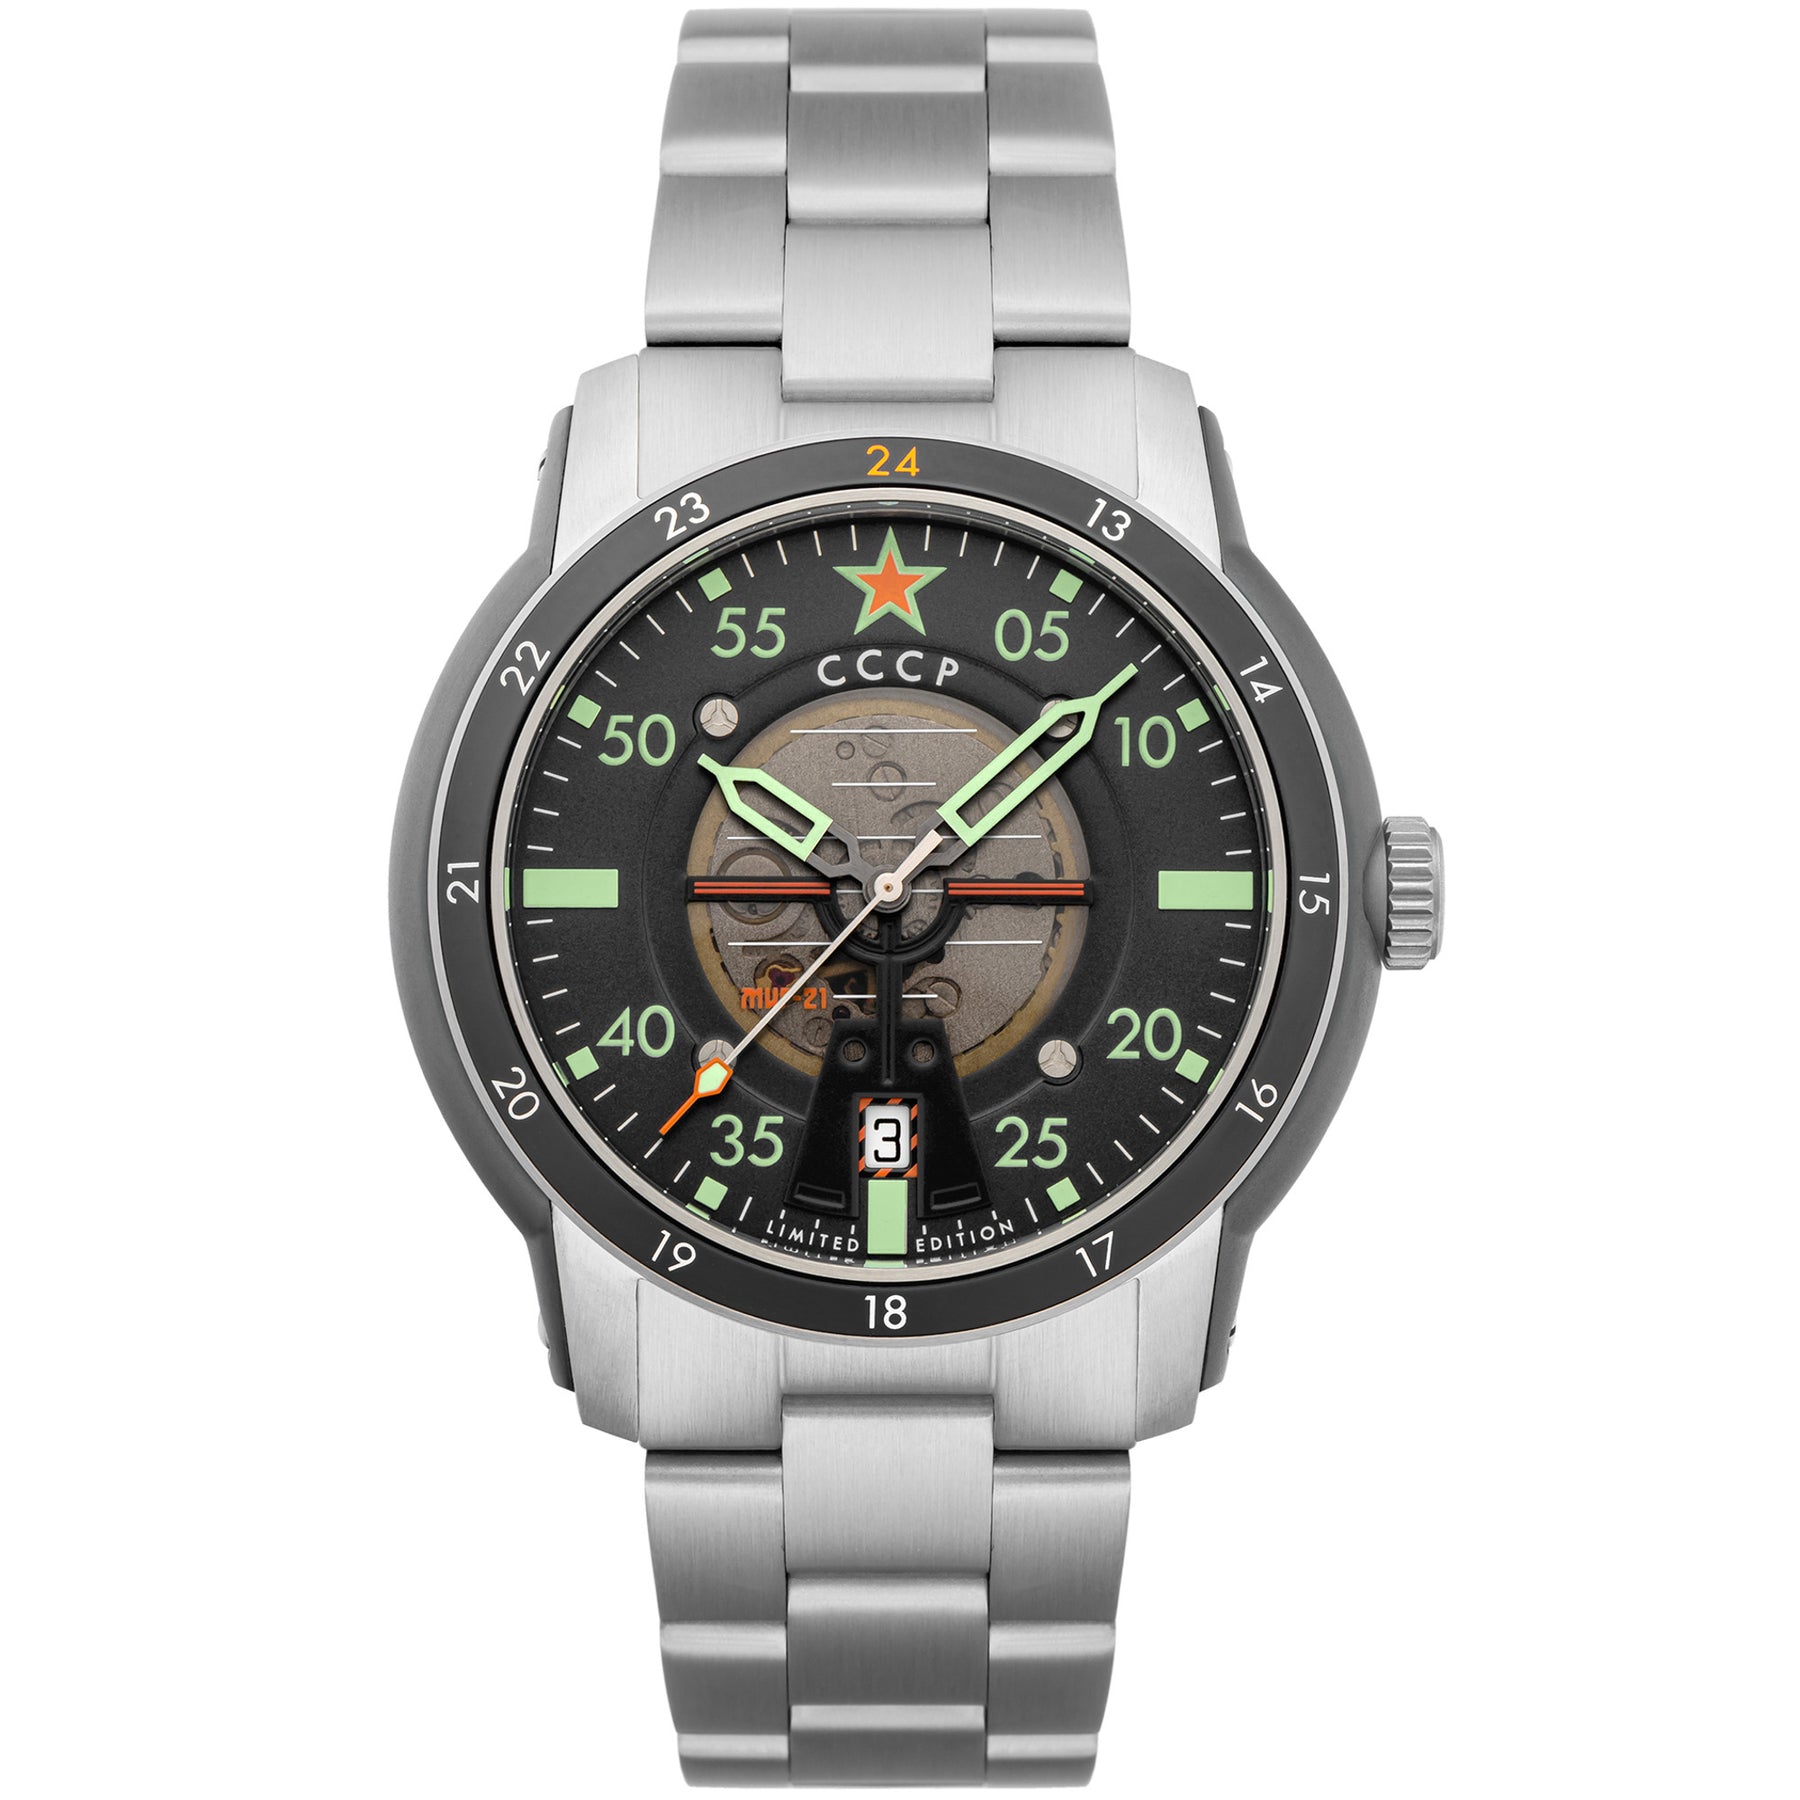 Watch Review: CCCP HERITAGE CP-7020-03 | Watch Freeks